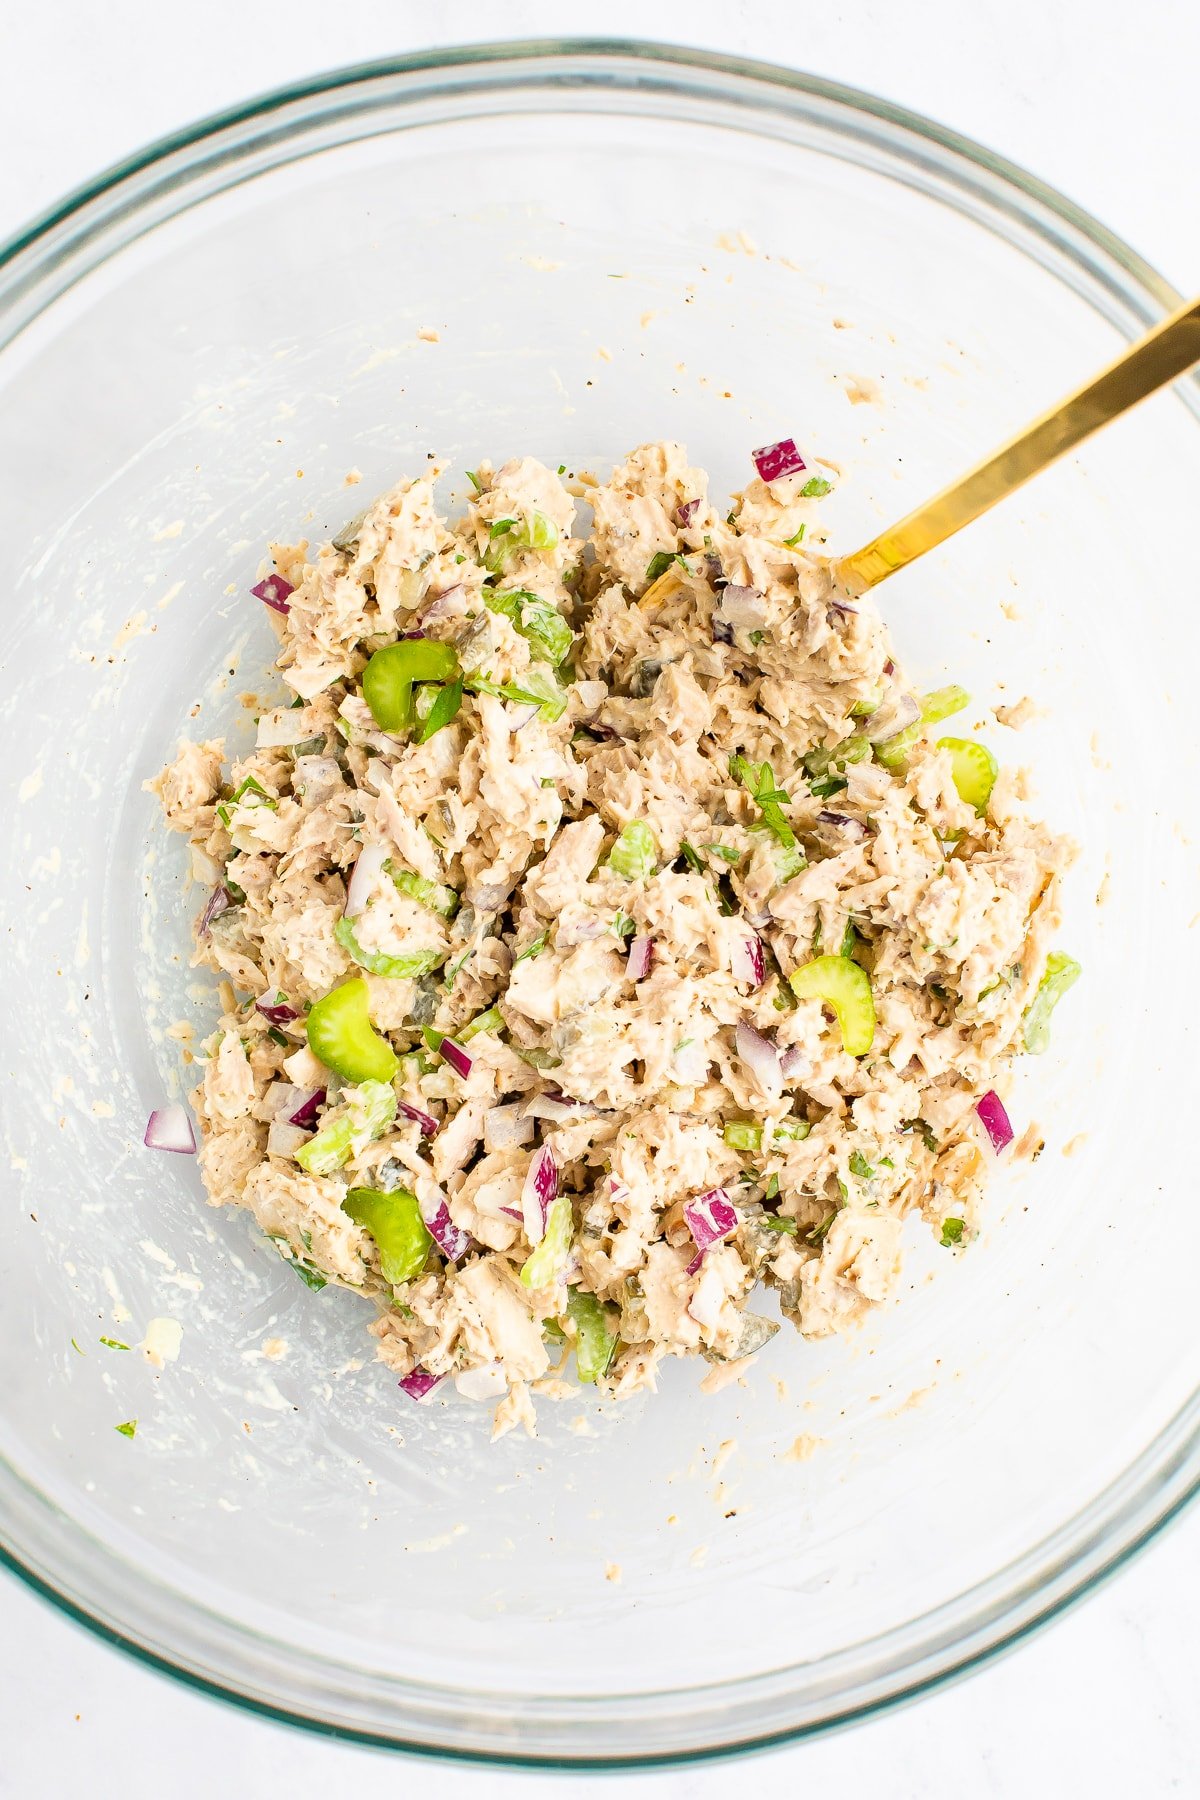 Spoon mixing up tuna salad in a mixing bowl.